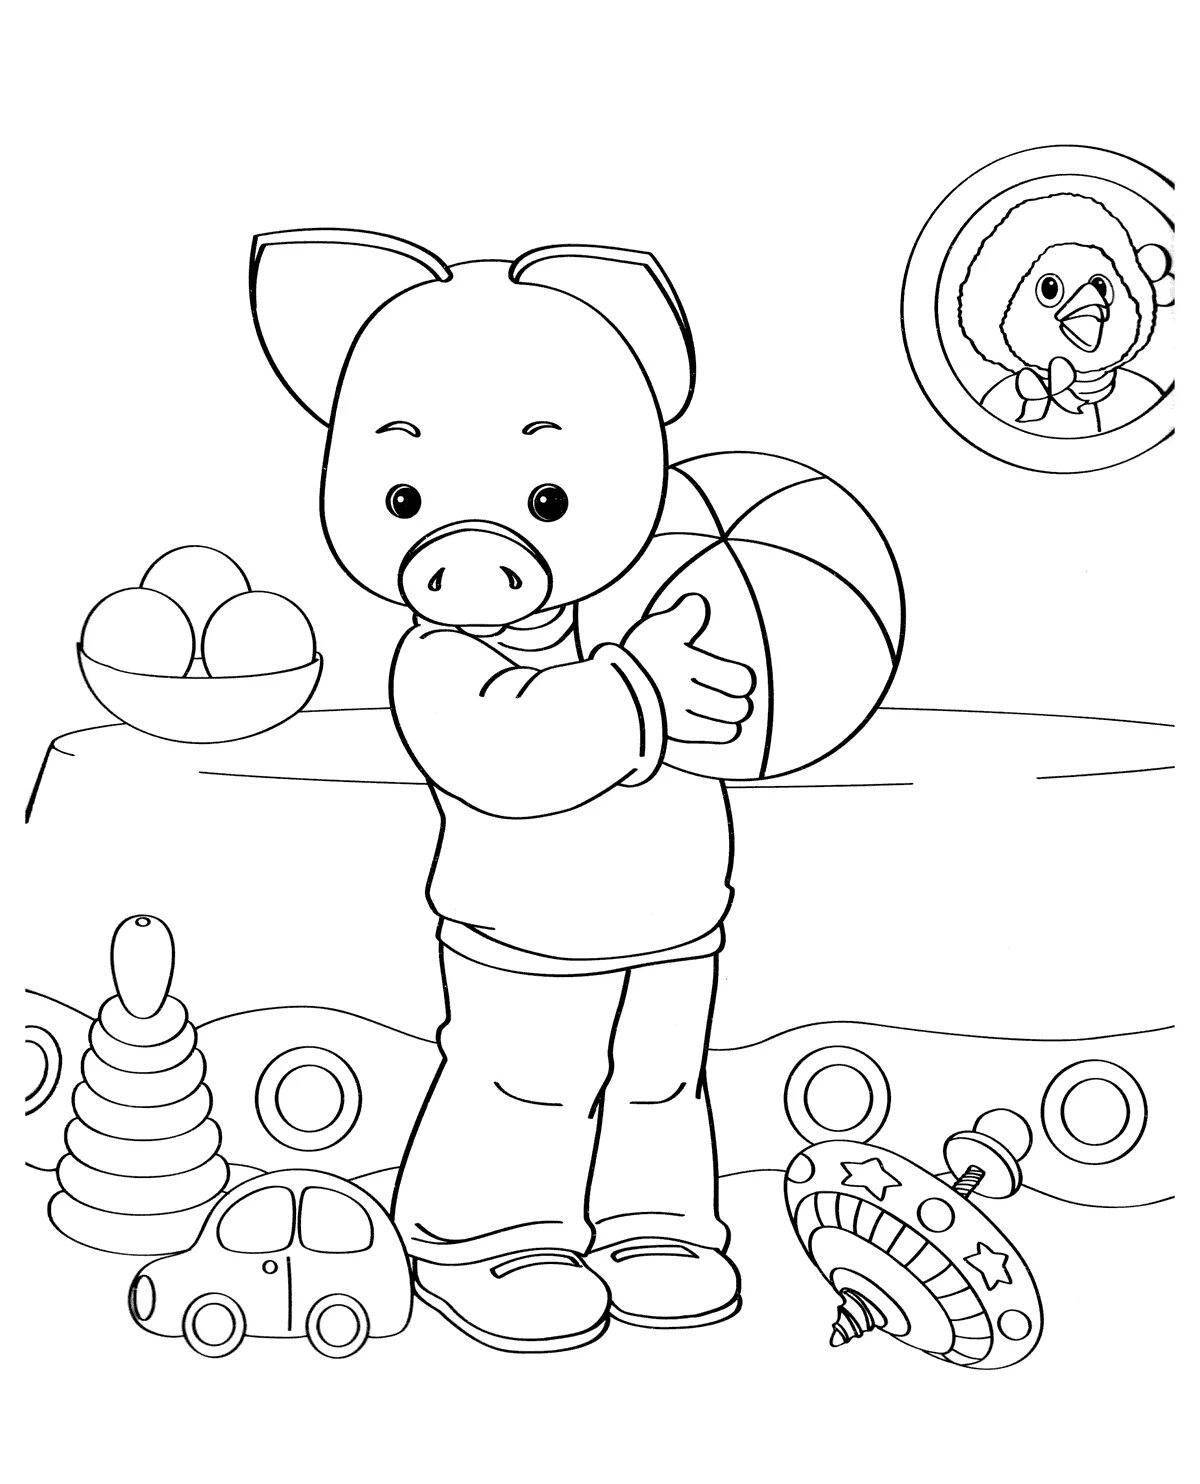 Color explosion aababy coloring page